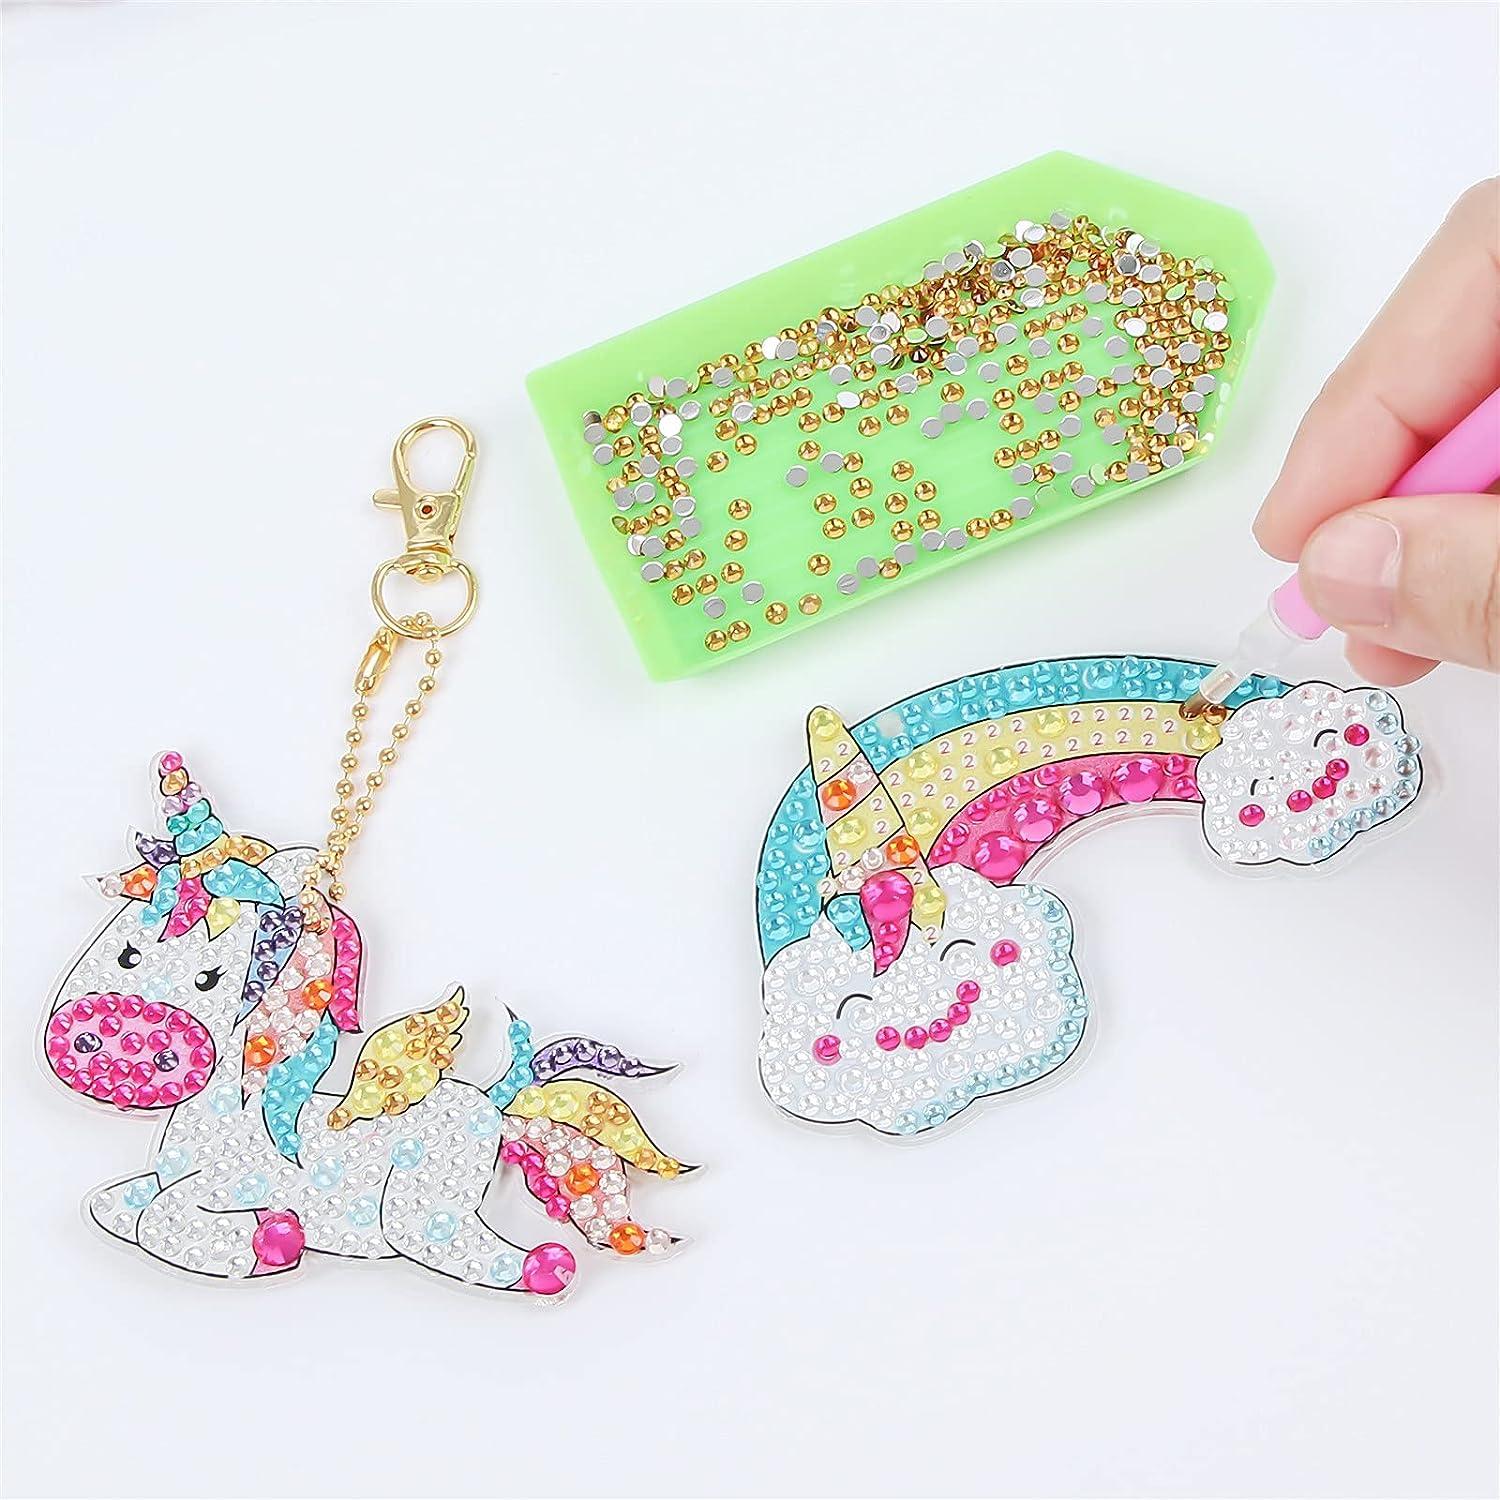  6Pc Set of Double-Sided Diamond Painting Keychains